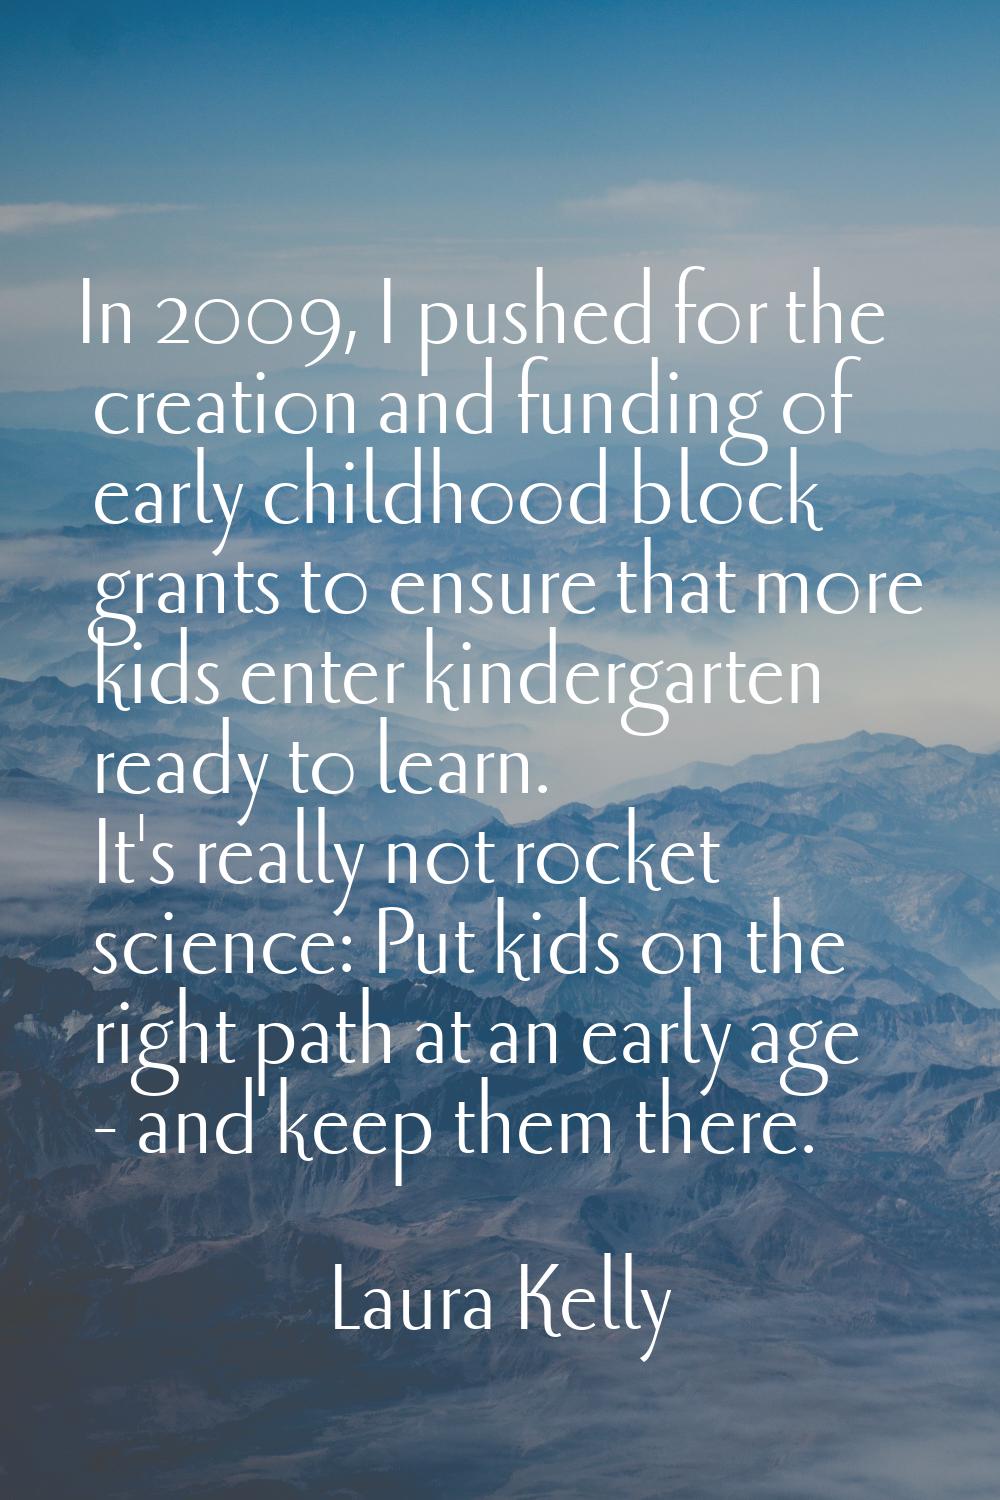 In 2009, I pushed for the creation and funding of early childhood block grants to ensure that more 